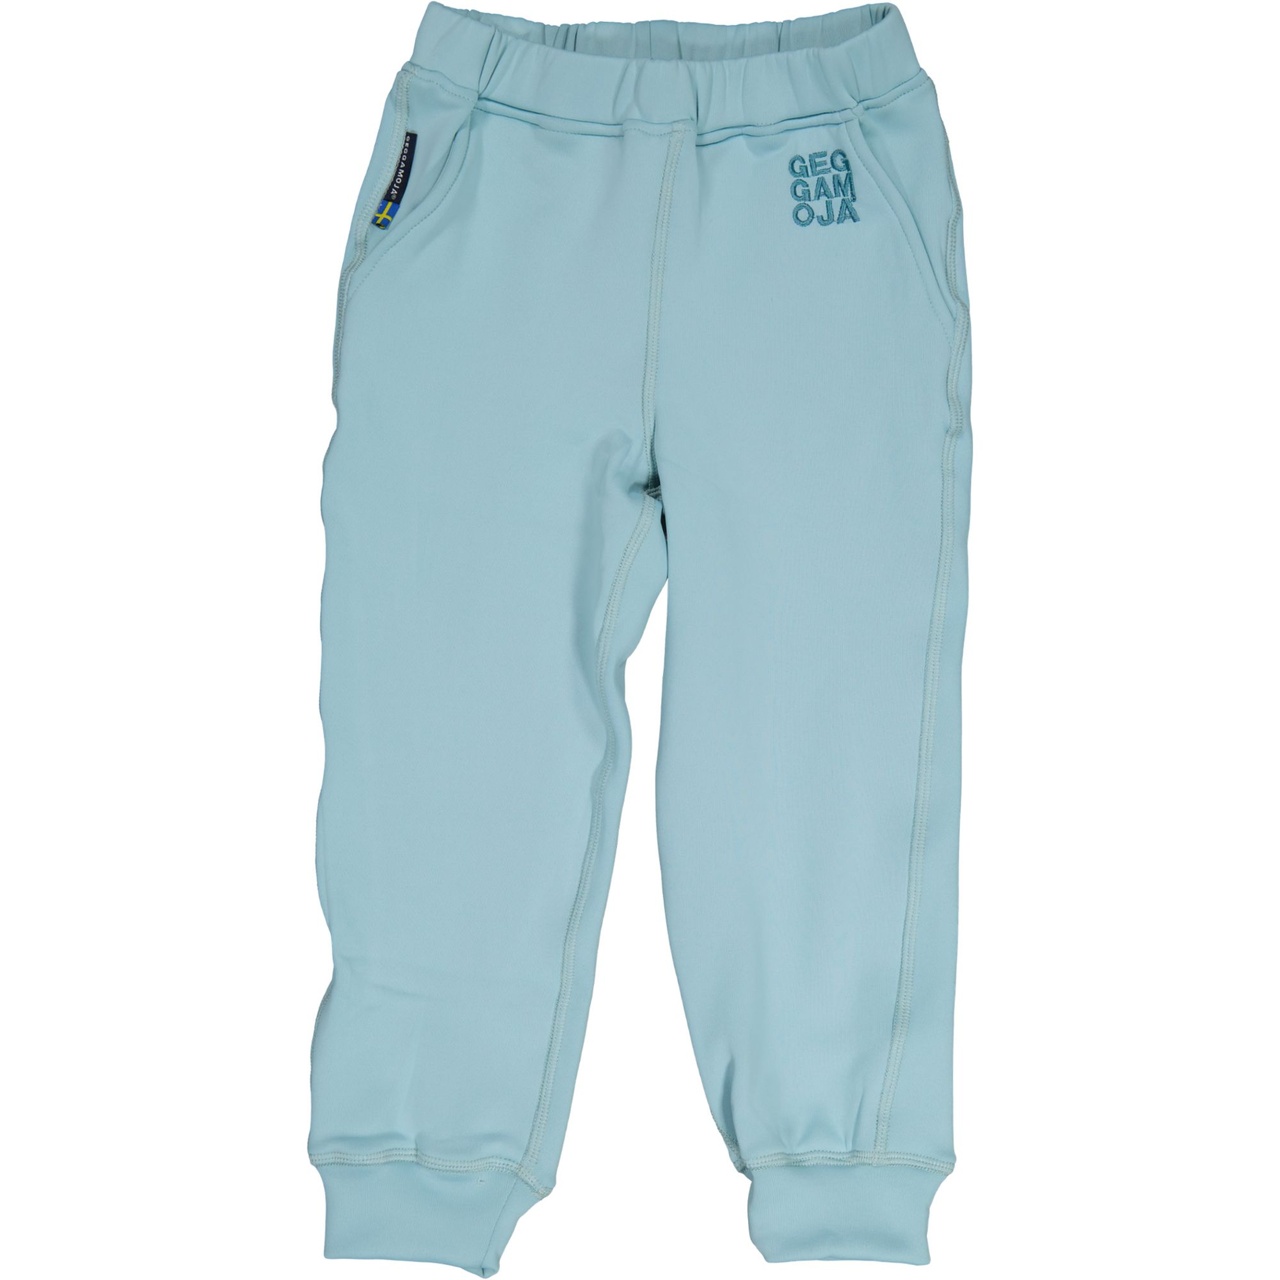 Stretch pant Turquoise 158/164